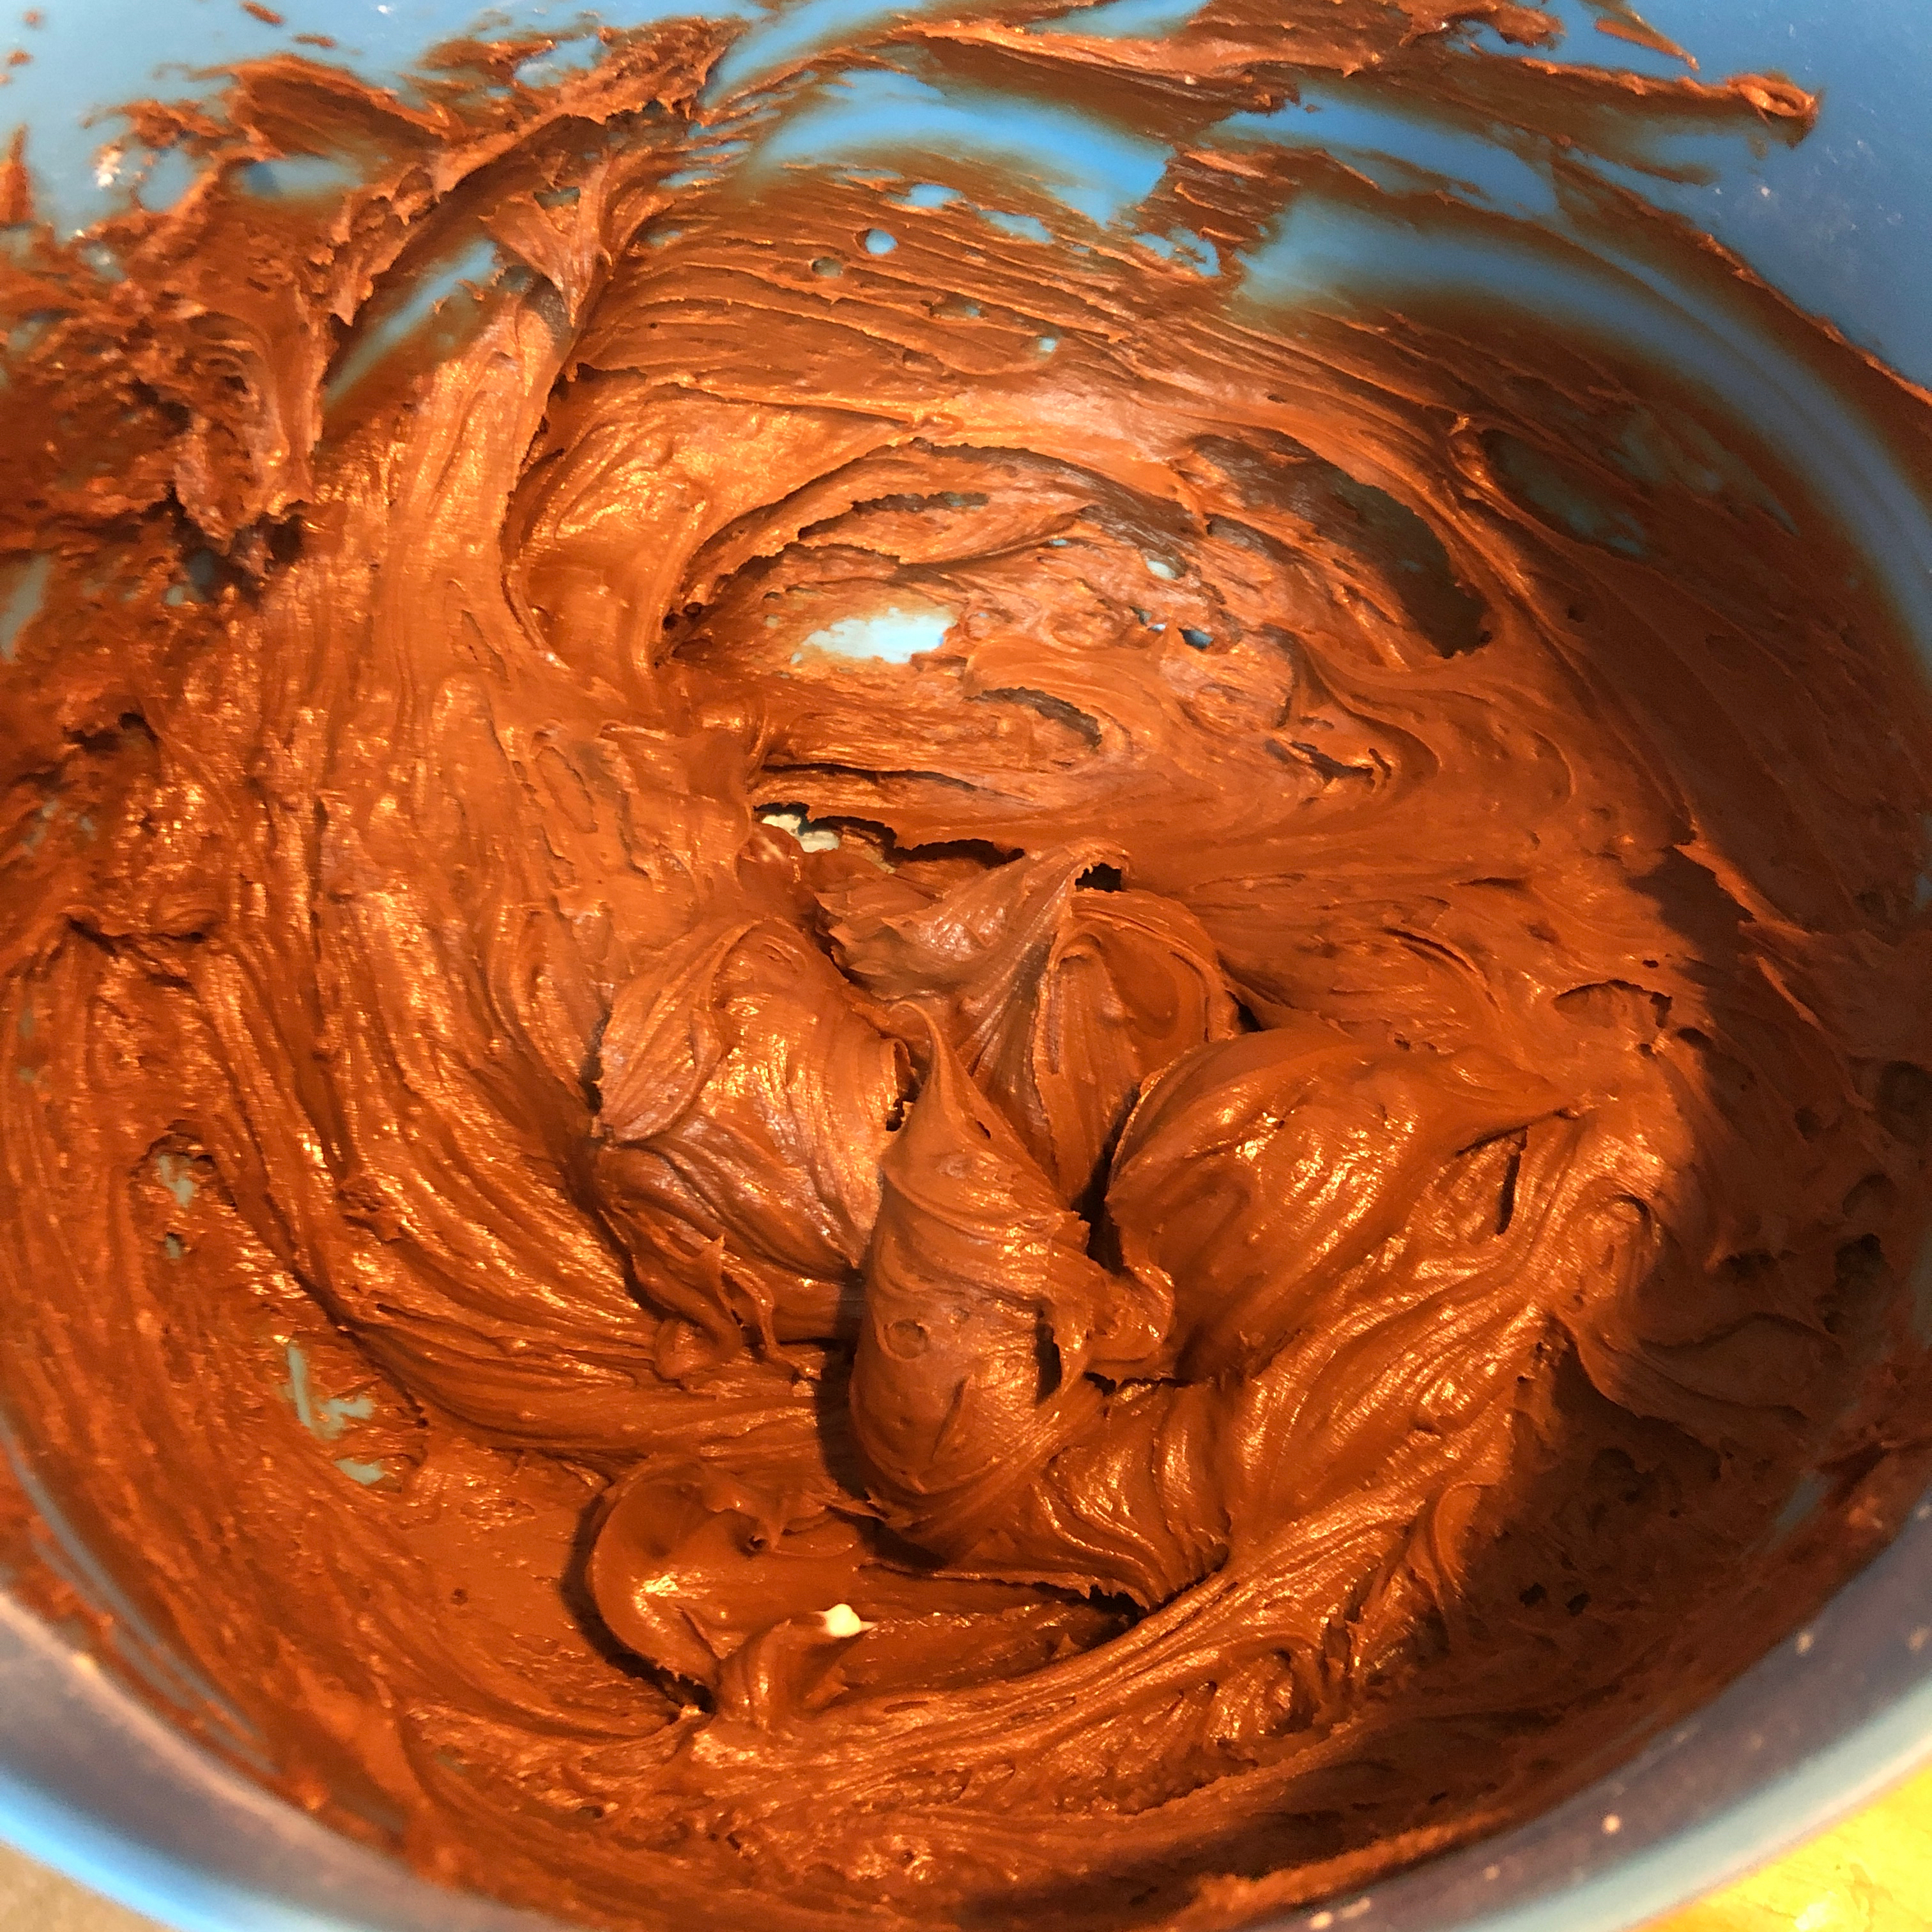 Sour Cream Chocolate Frosting 